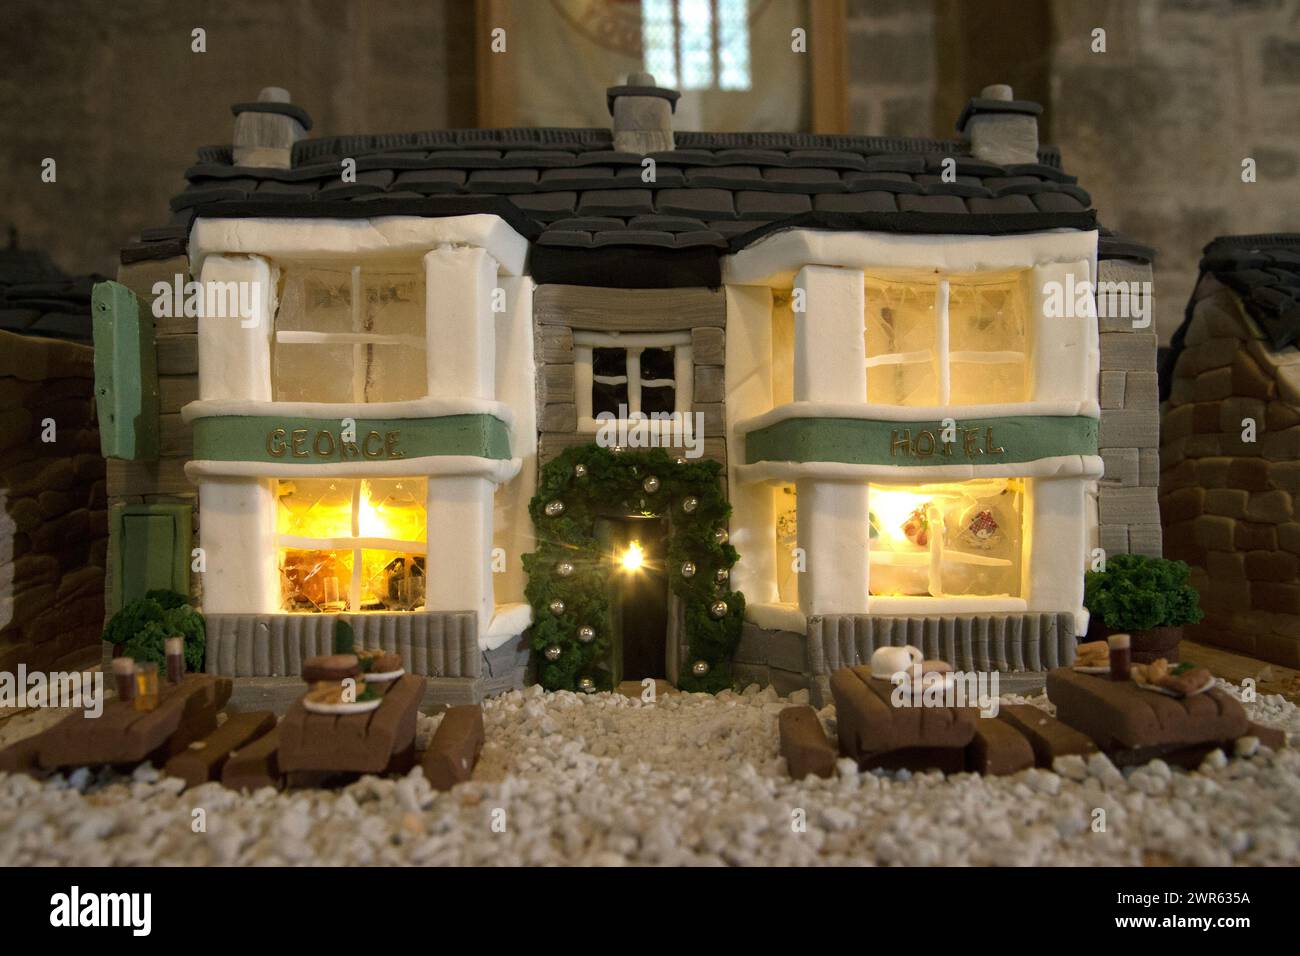 07/12/16  George Hotel.  In this incredibly detailed replica of a small Peak District village, everything is edible, from the baubles on the Christmas Stock Photo